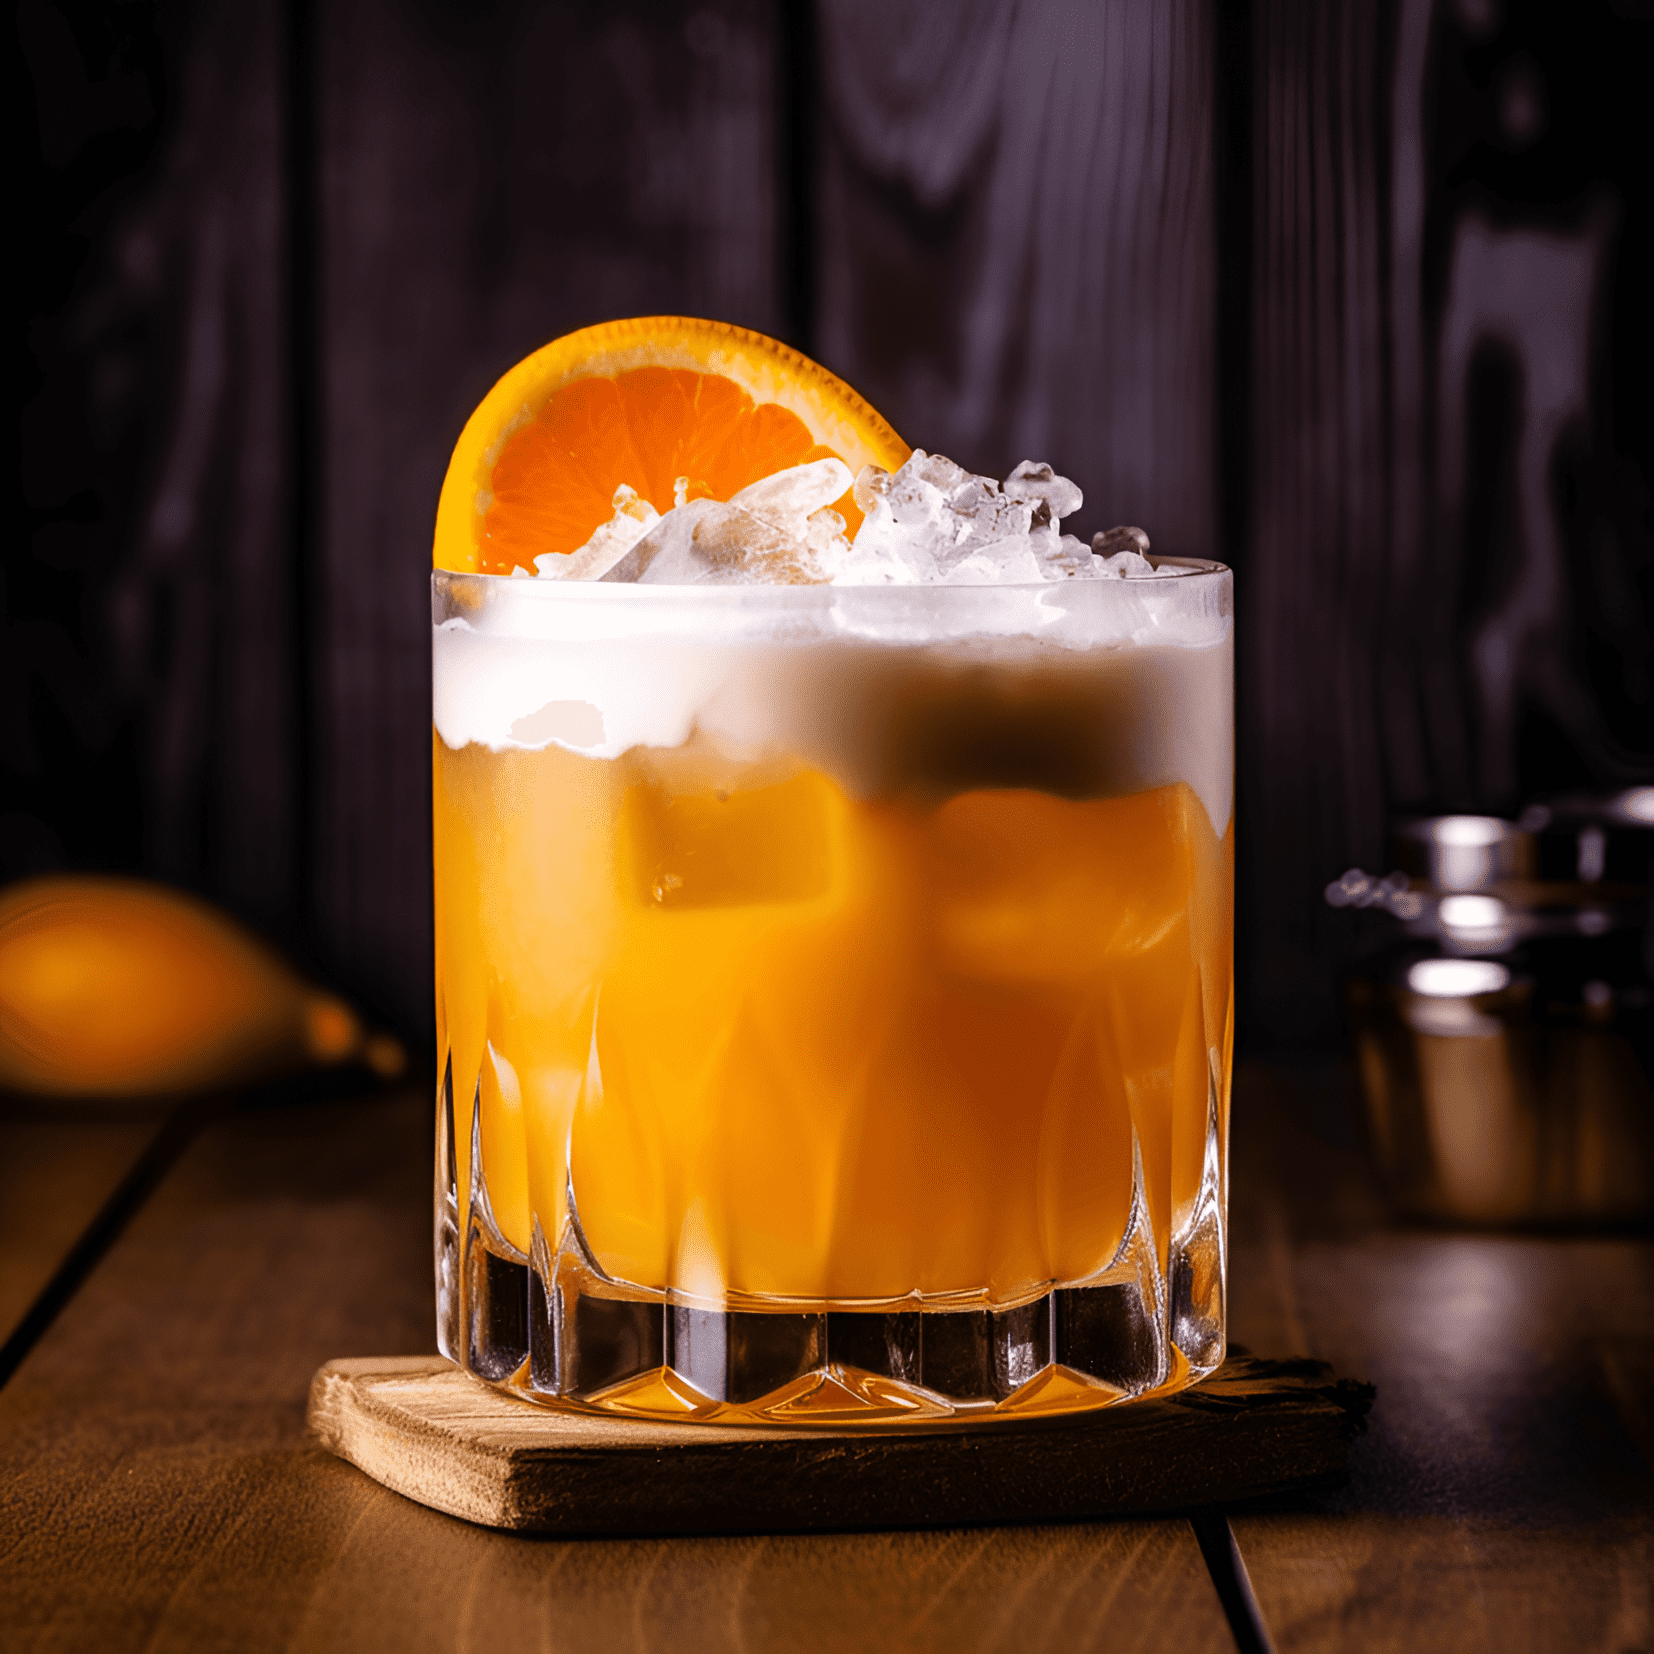 Orange Sour Cocktail Recipe - The Orange Sour is a refreshing, tangy, and slightly sweet cocktail. The combination of fresh orange juice and lemon juice creates a vibrant citrus flavor, while the simple syrup adds a touch of sweetness to balance the sourness. The whiskey provides a smooth, warm undertone that complements the fruity flavors.